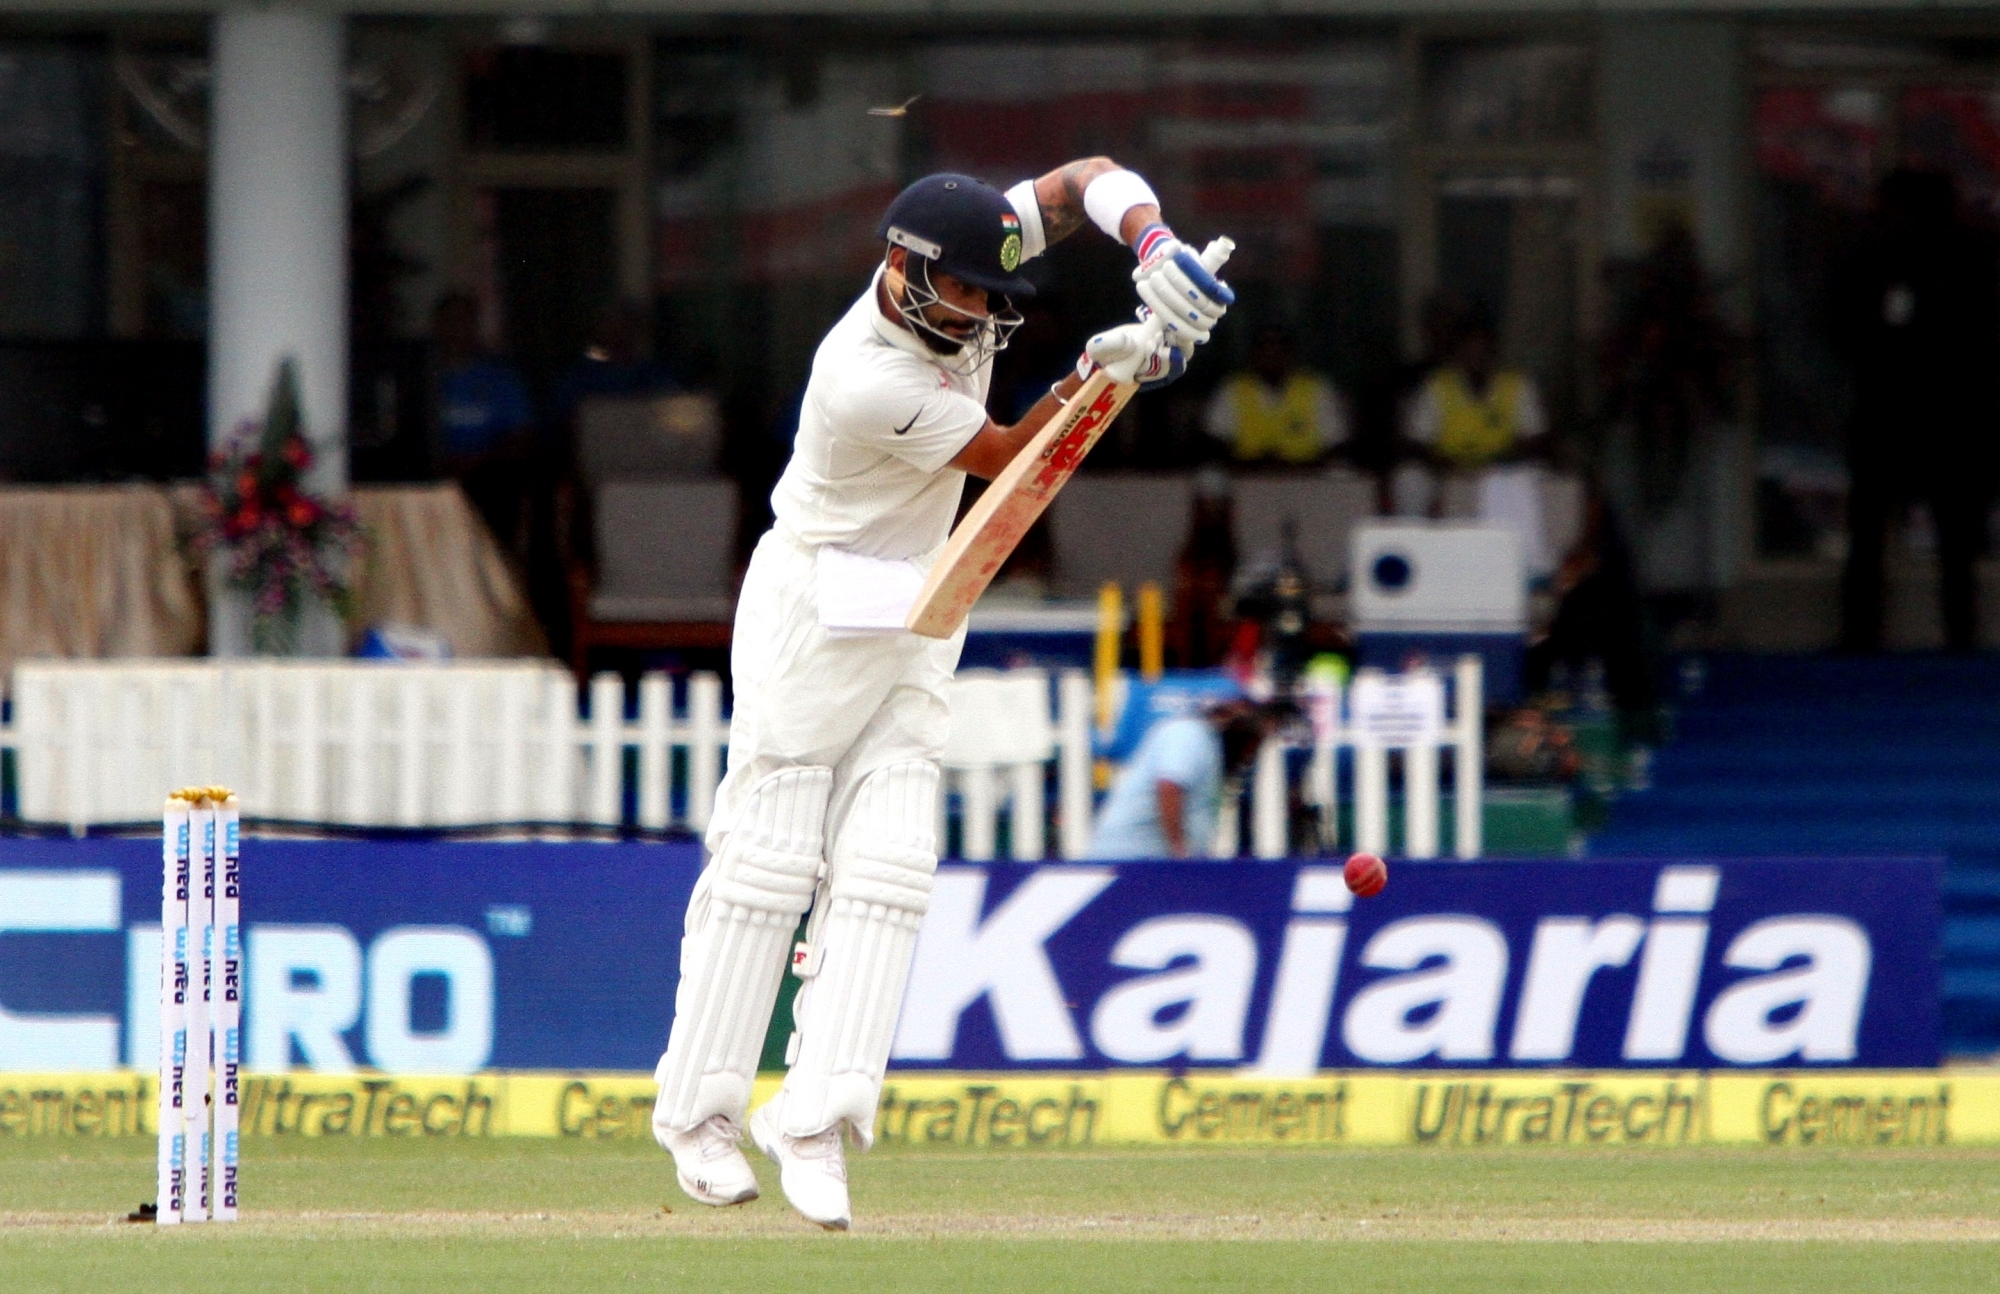 Ind v NZ |India bowled out for 318 in first innings